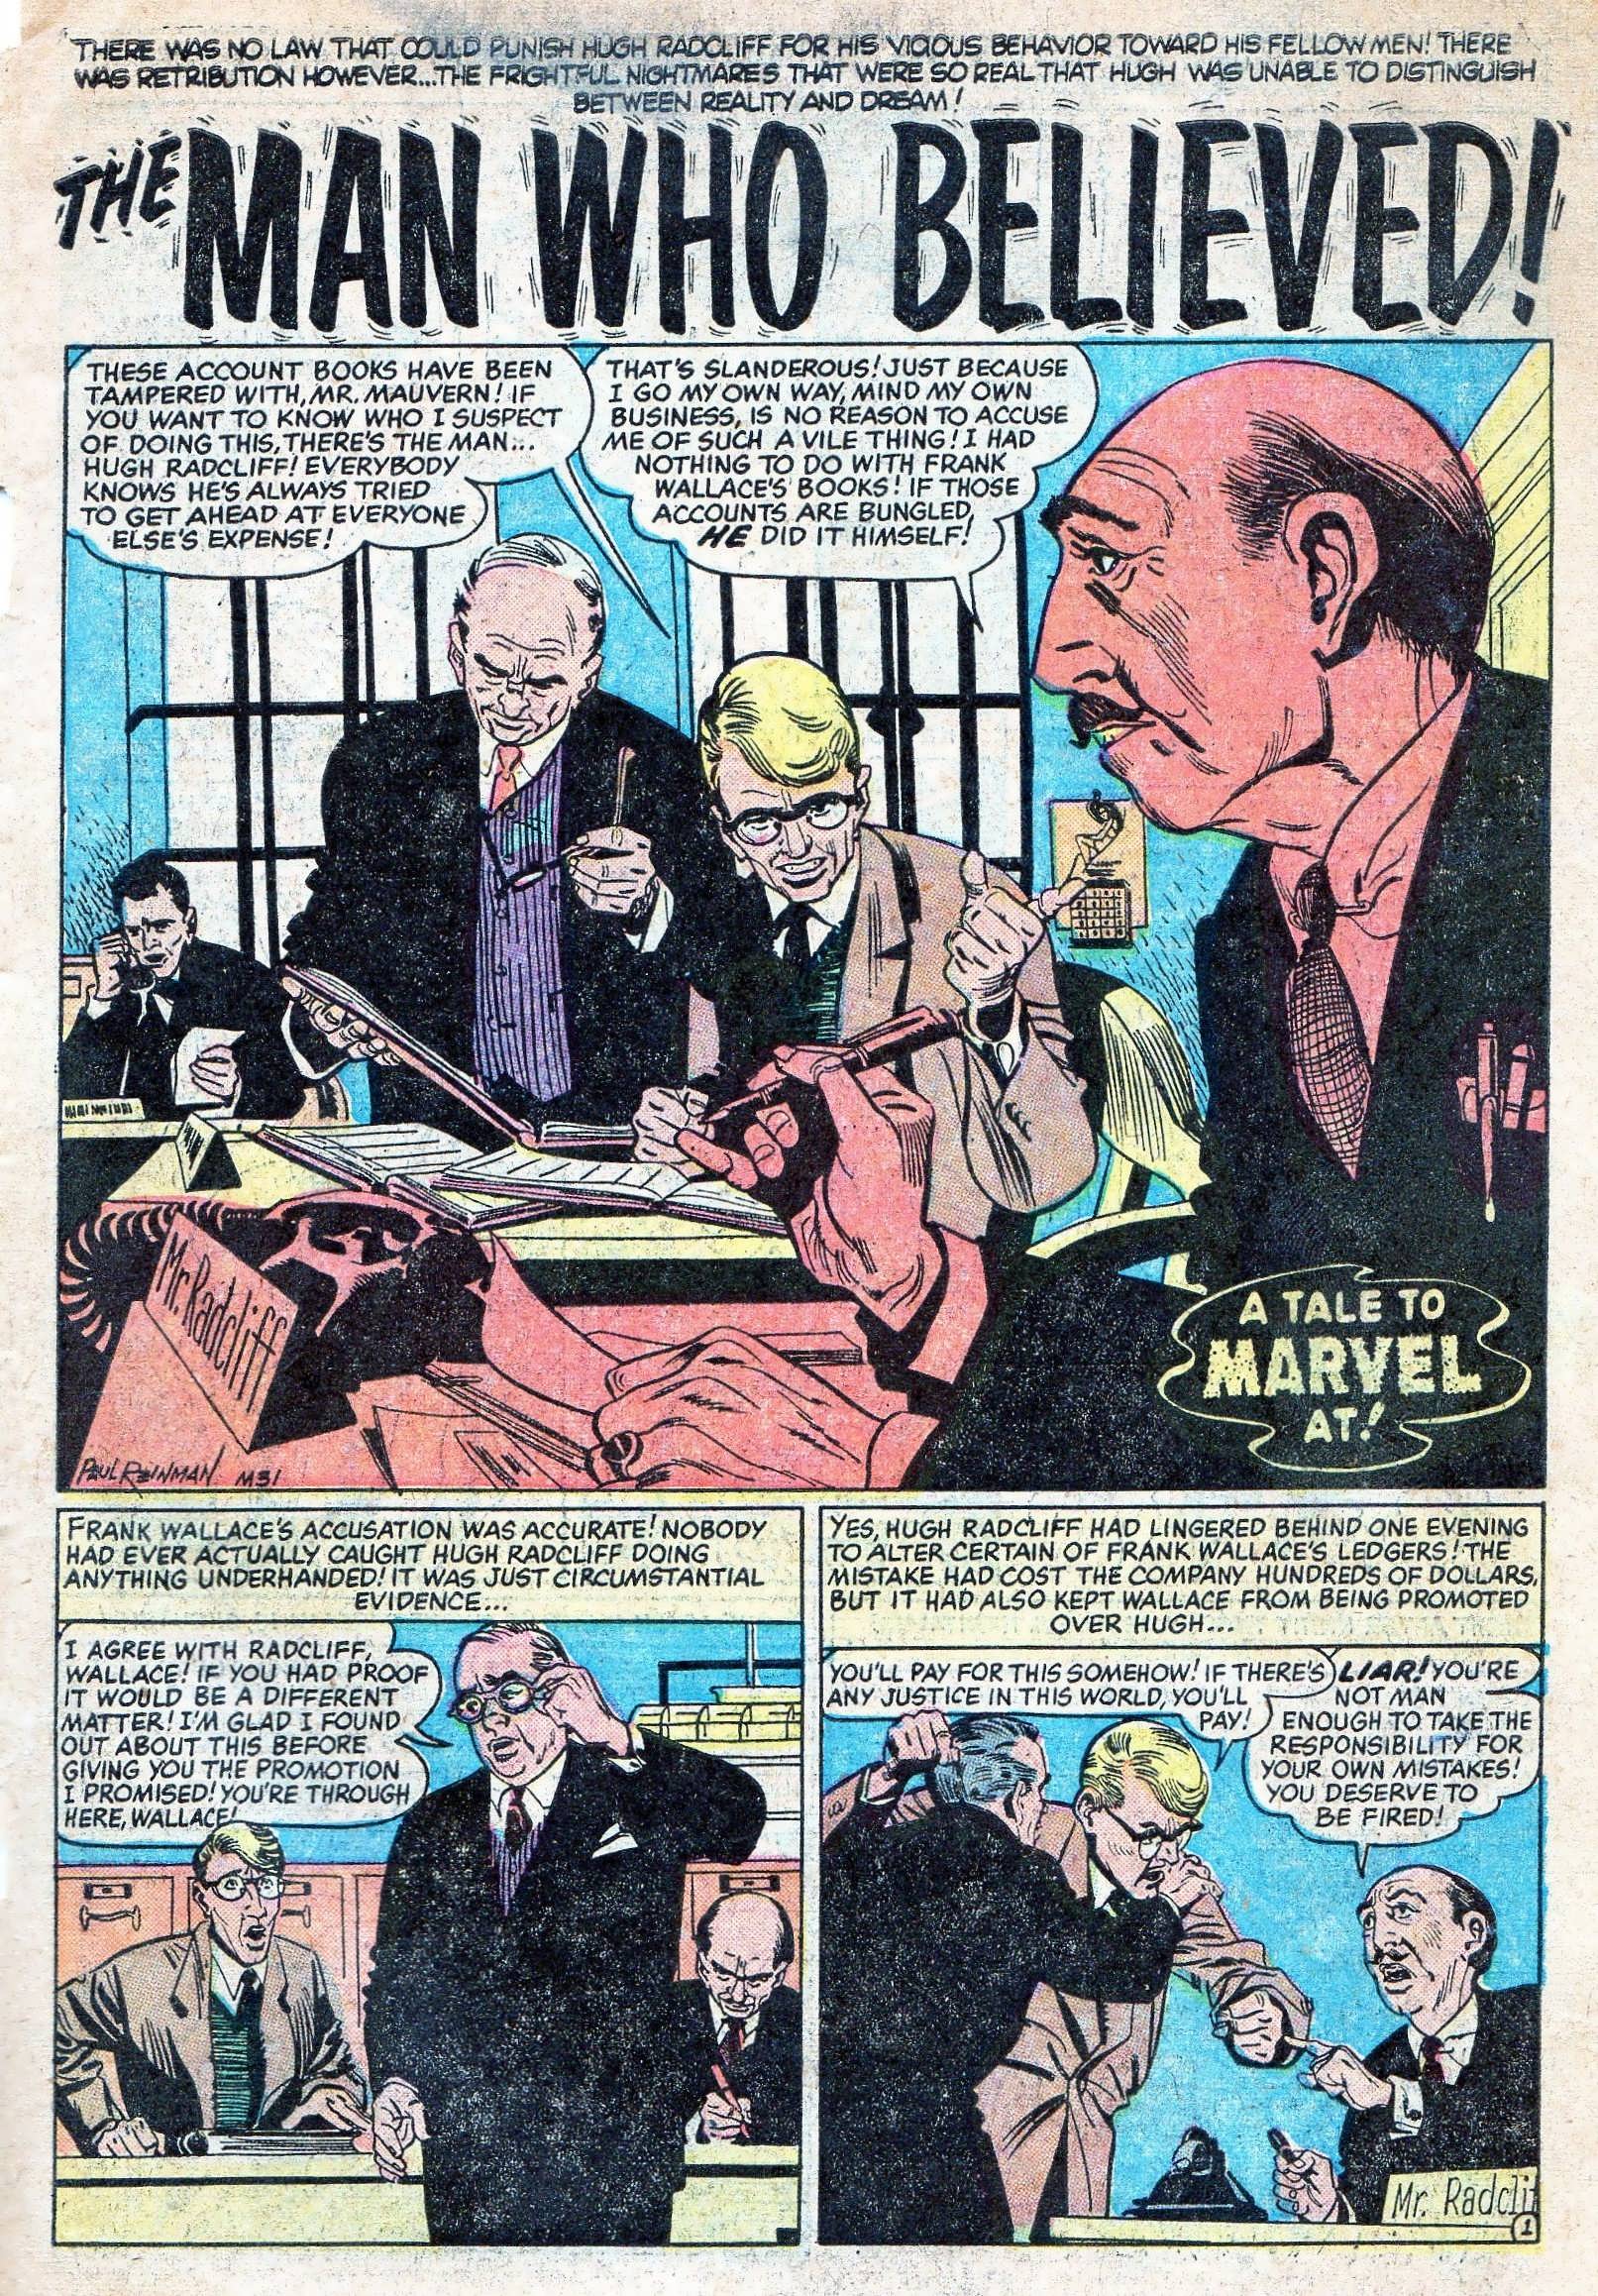 Marvel Tales (1949) 159 Page 2